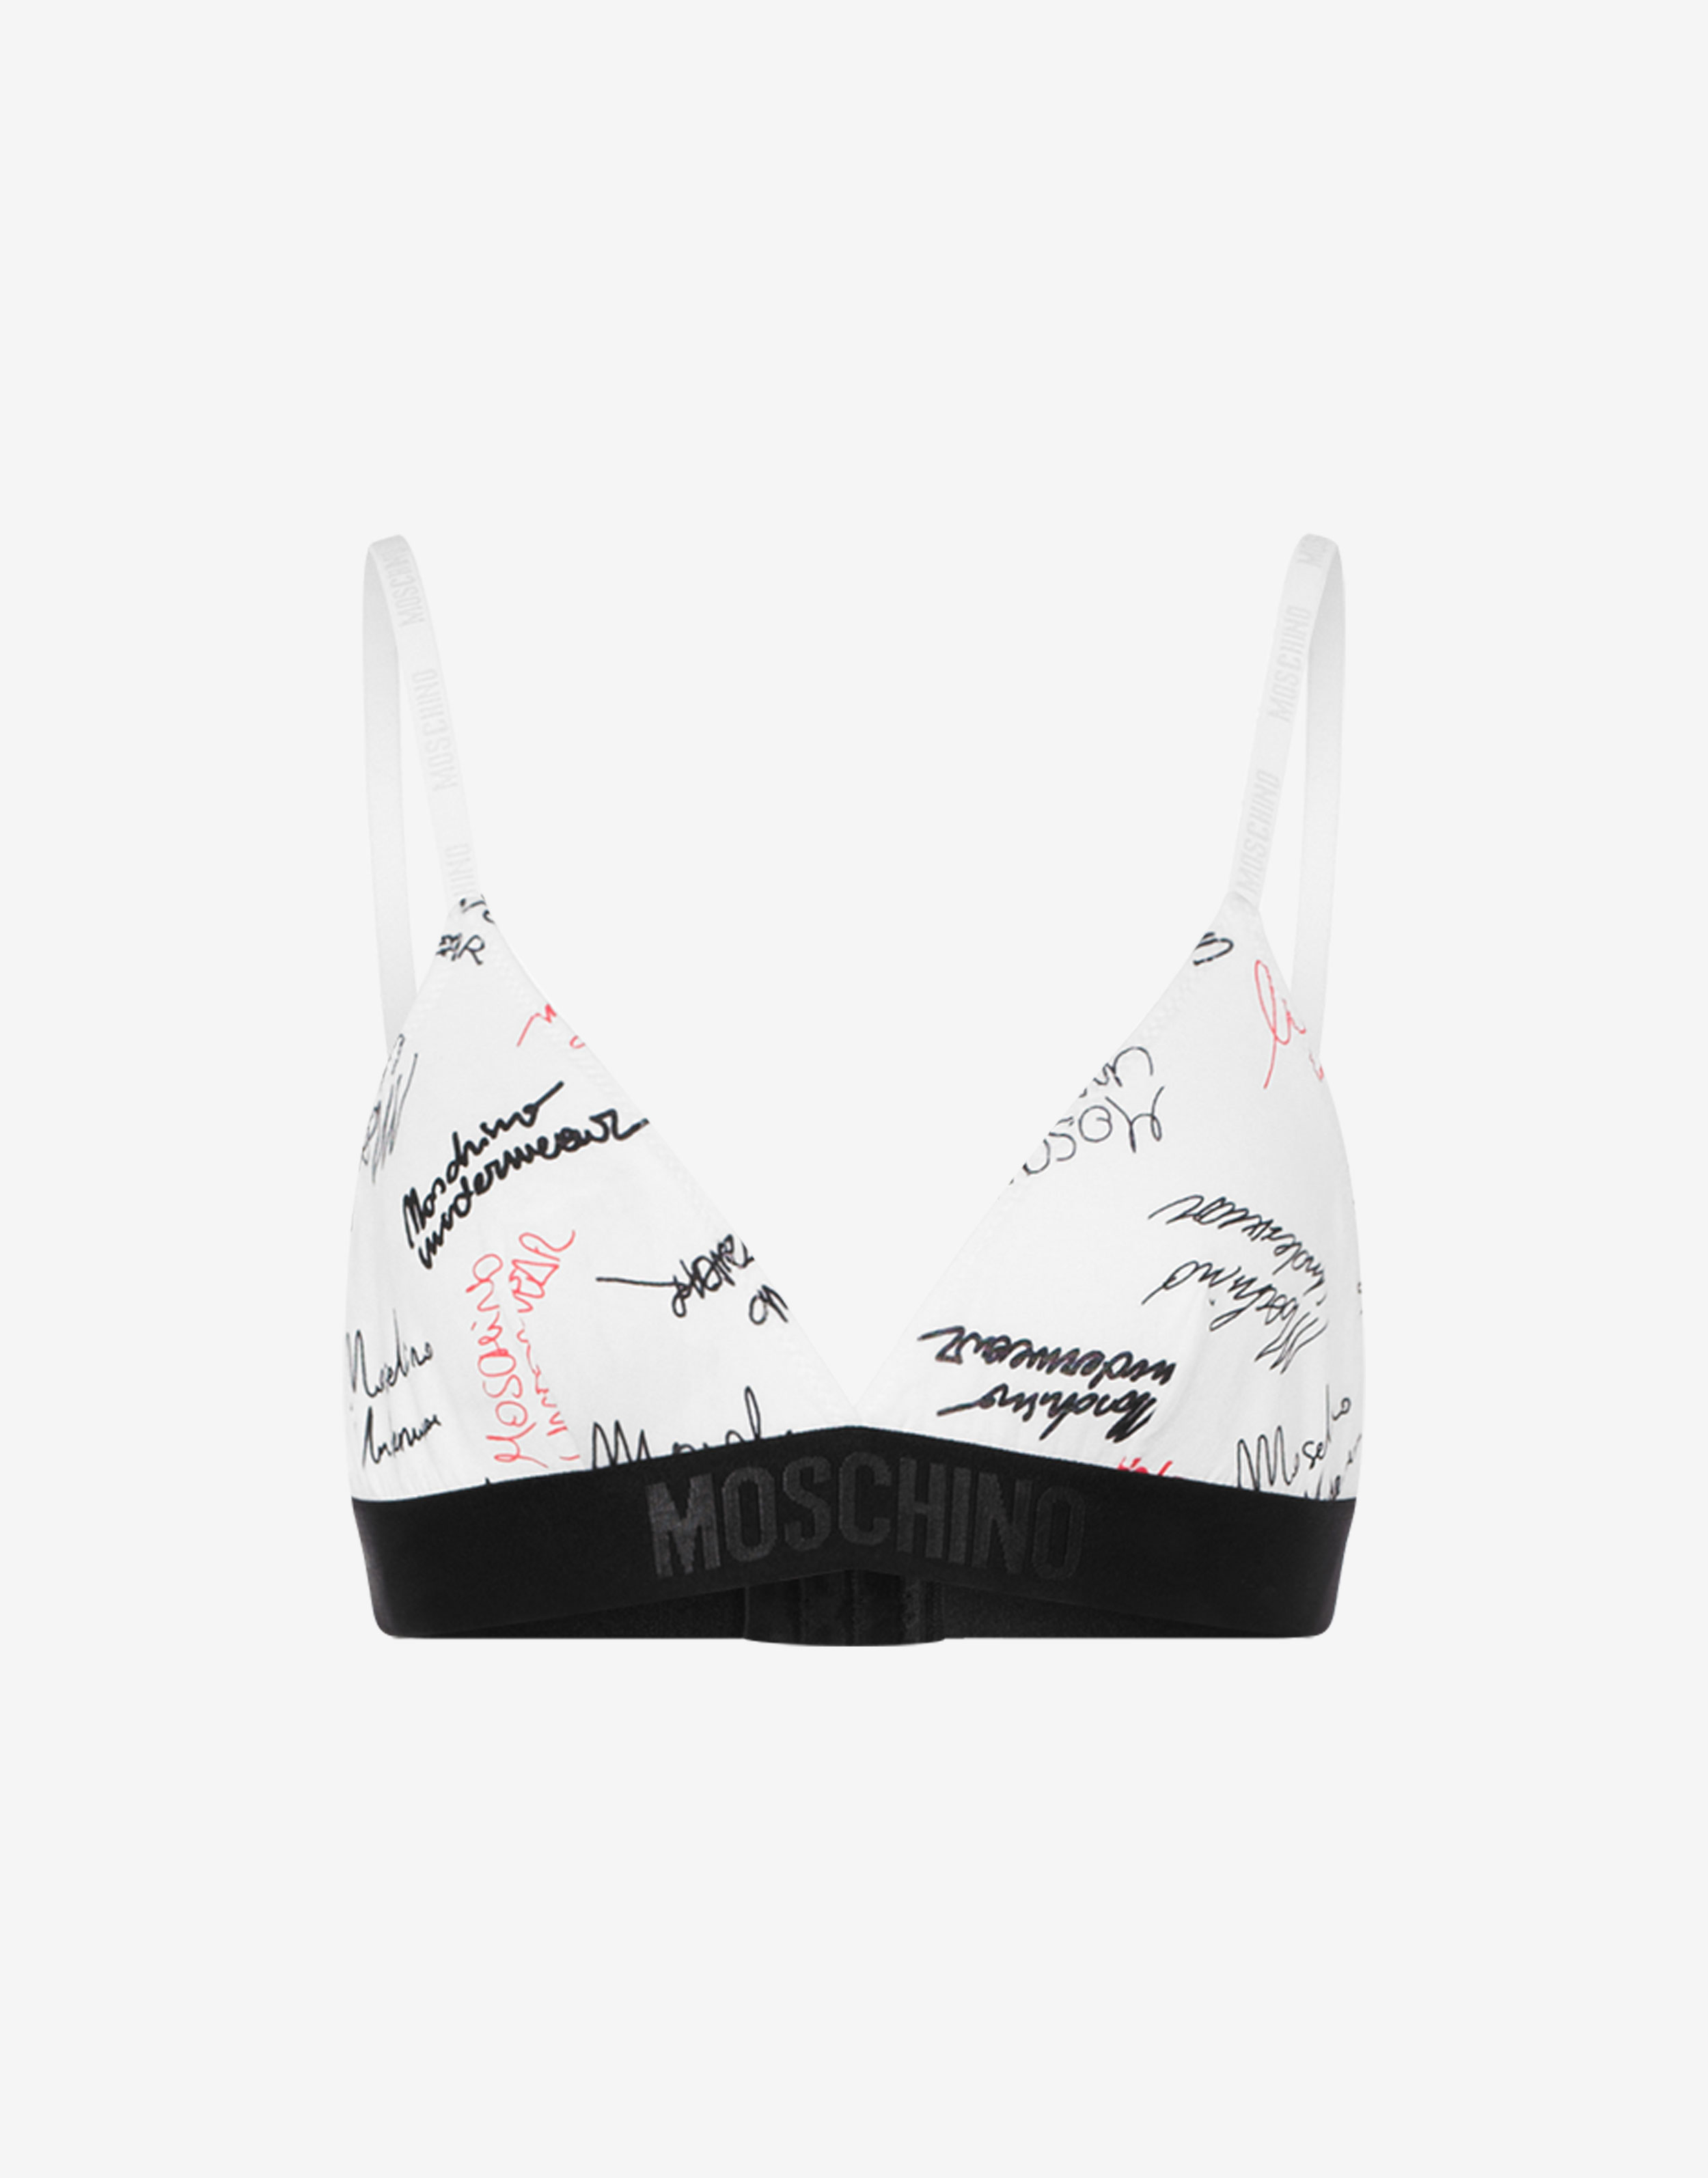 Bra with logo  Moschino Official Store